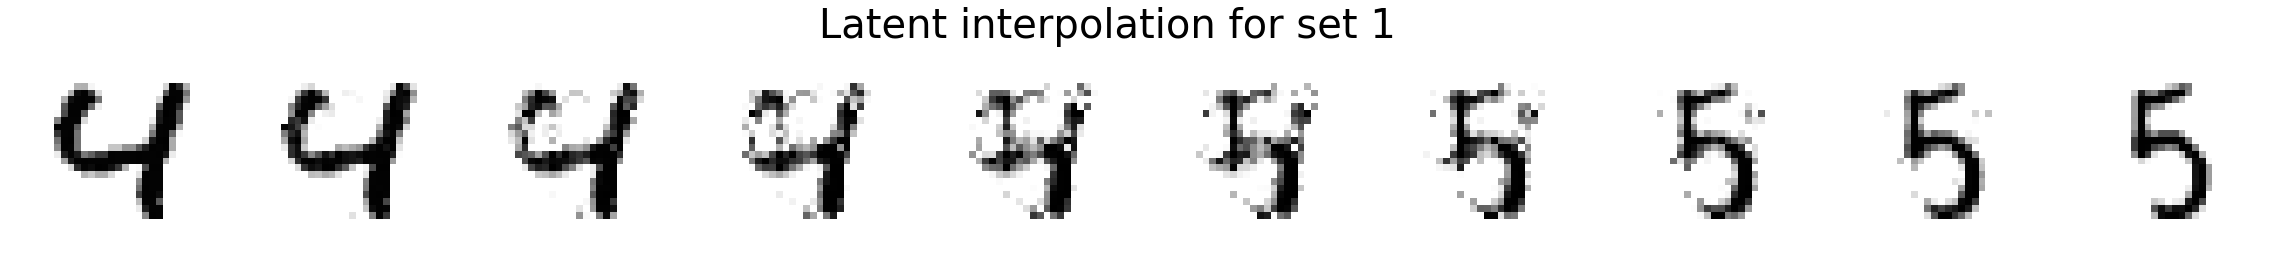 ../../_images/generated_notebooks_demo_mnist_deep_copula_17_3.png